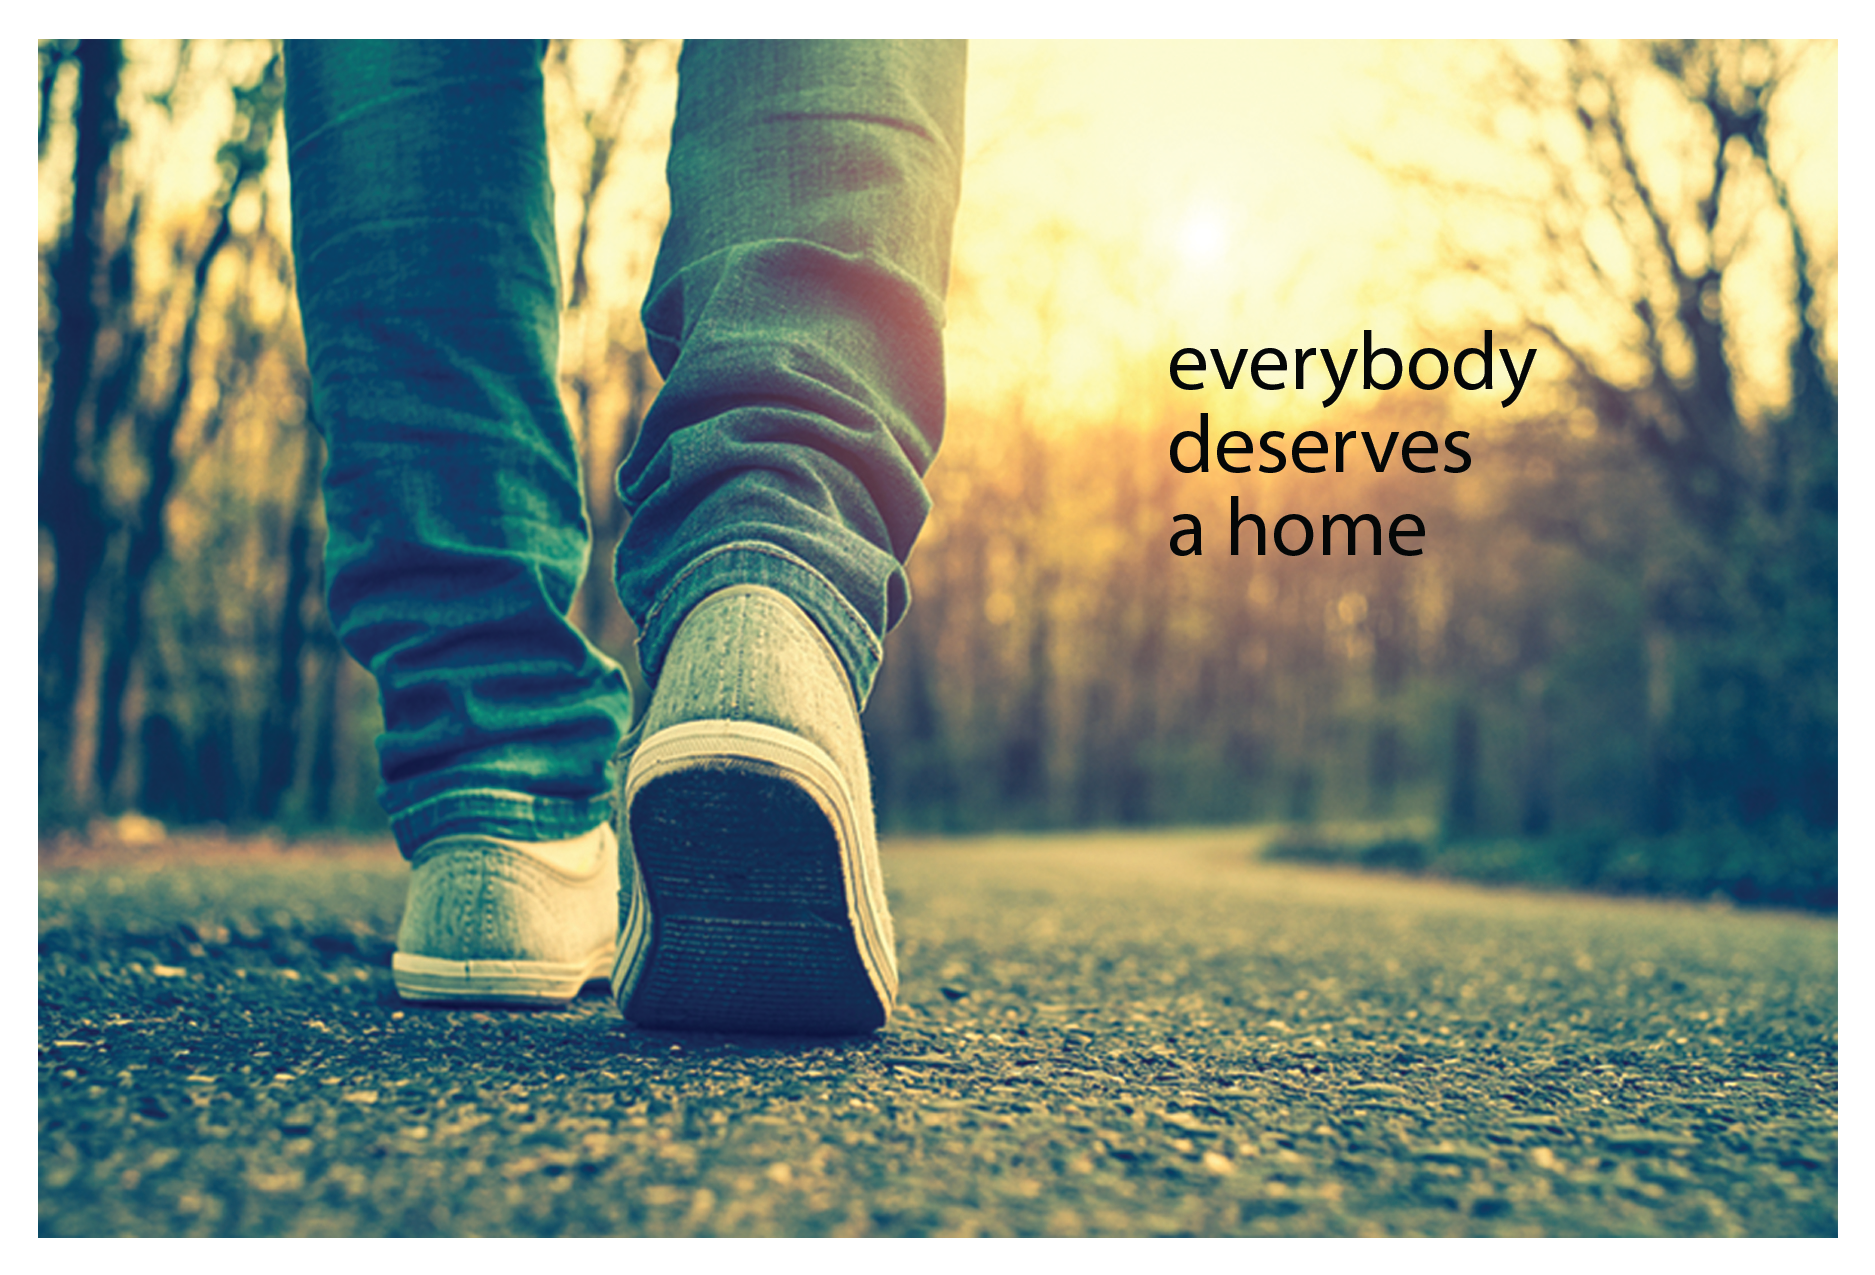 Feet in sneakers walking on a trail and the text on the image reads " everybody deserves a home"